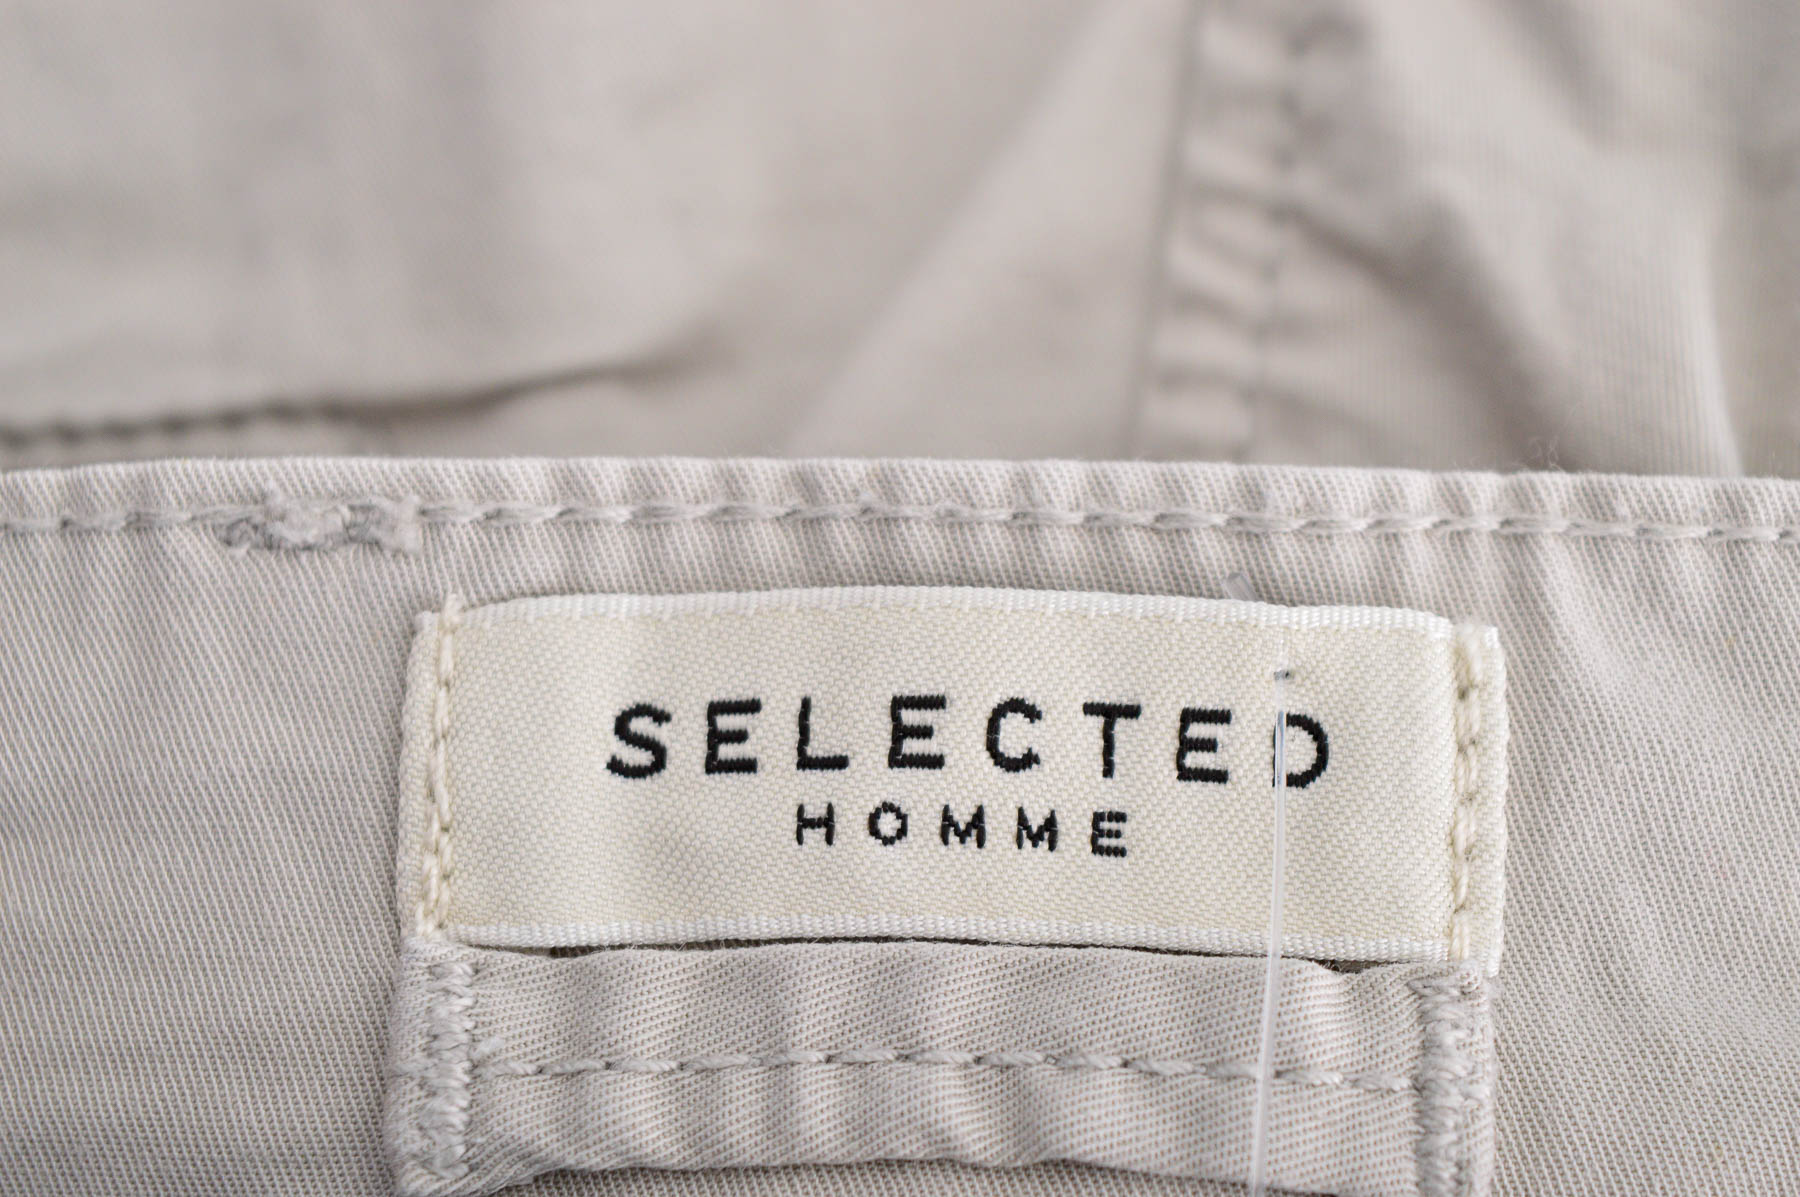 Men's shorts - SELECTED HOMME - 2